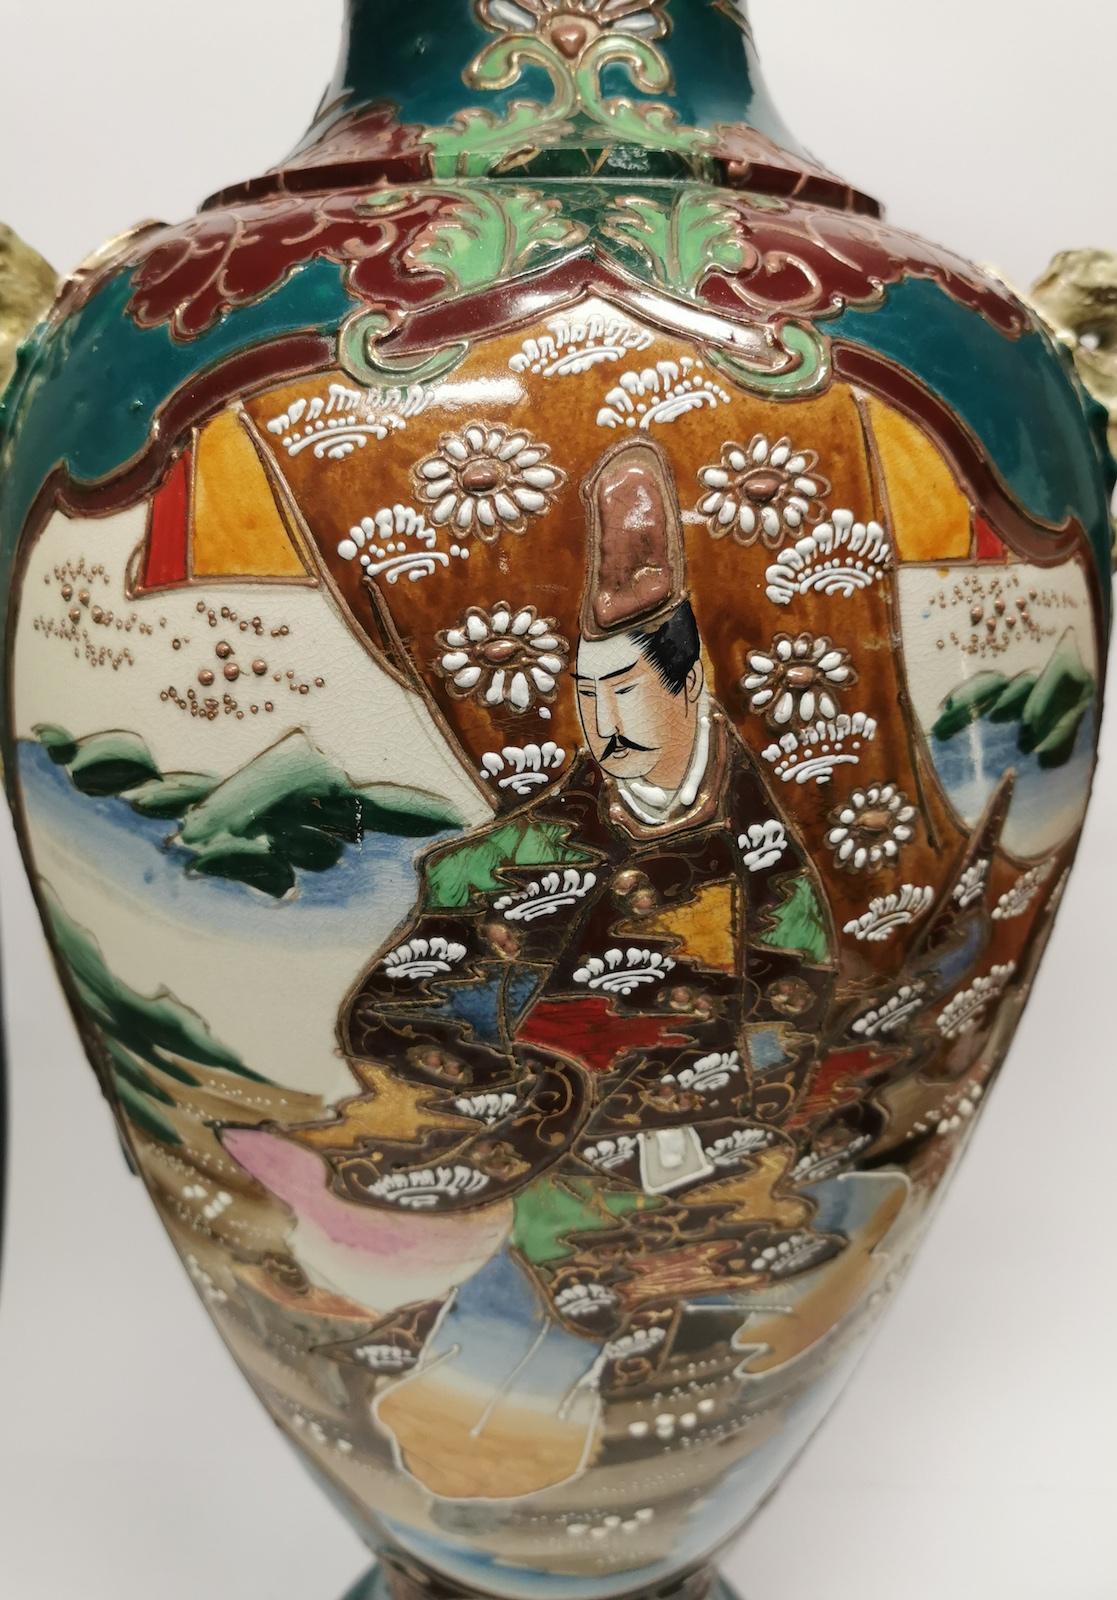 Chinese ceramic floor vase, hand painted, 
highly detailed Traditional Design of emperor and empress, 
vibrant original colour. 
No markings on the base.